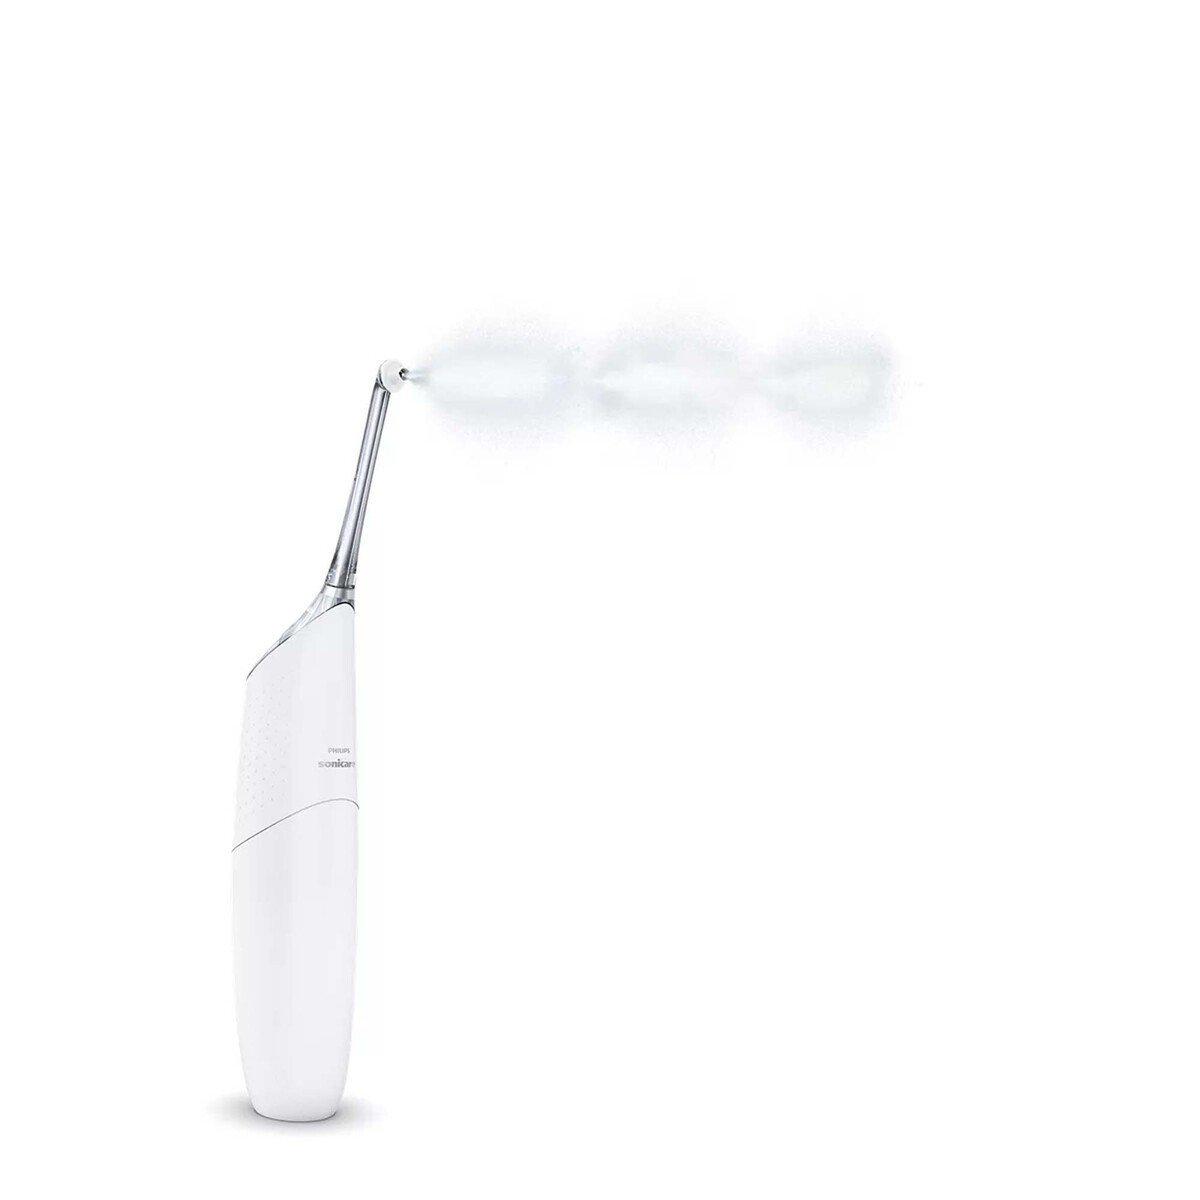 Philips Sonicare Electric Toothbrush With AirFloss Pro/Ultra HX8392/43